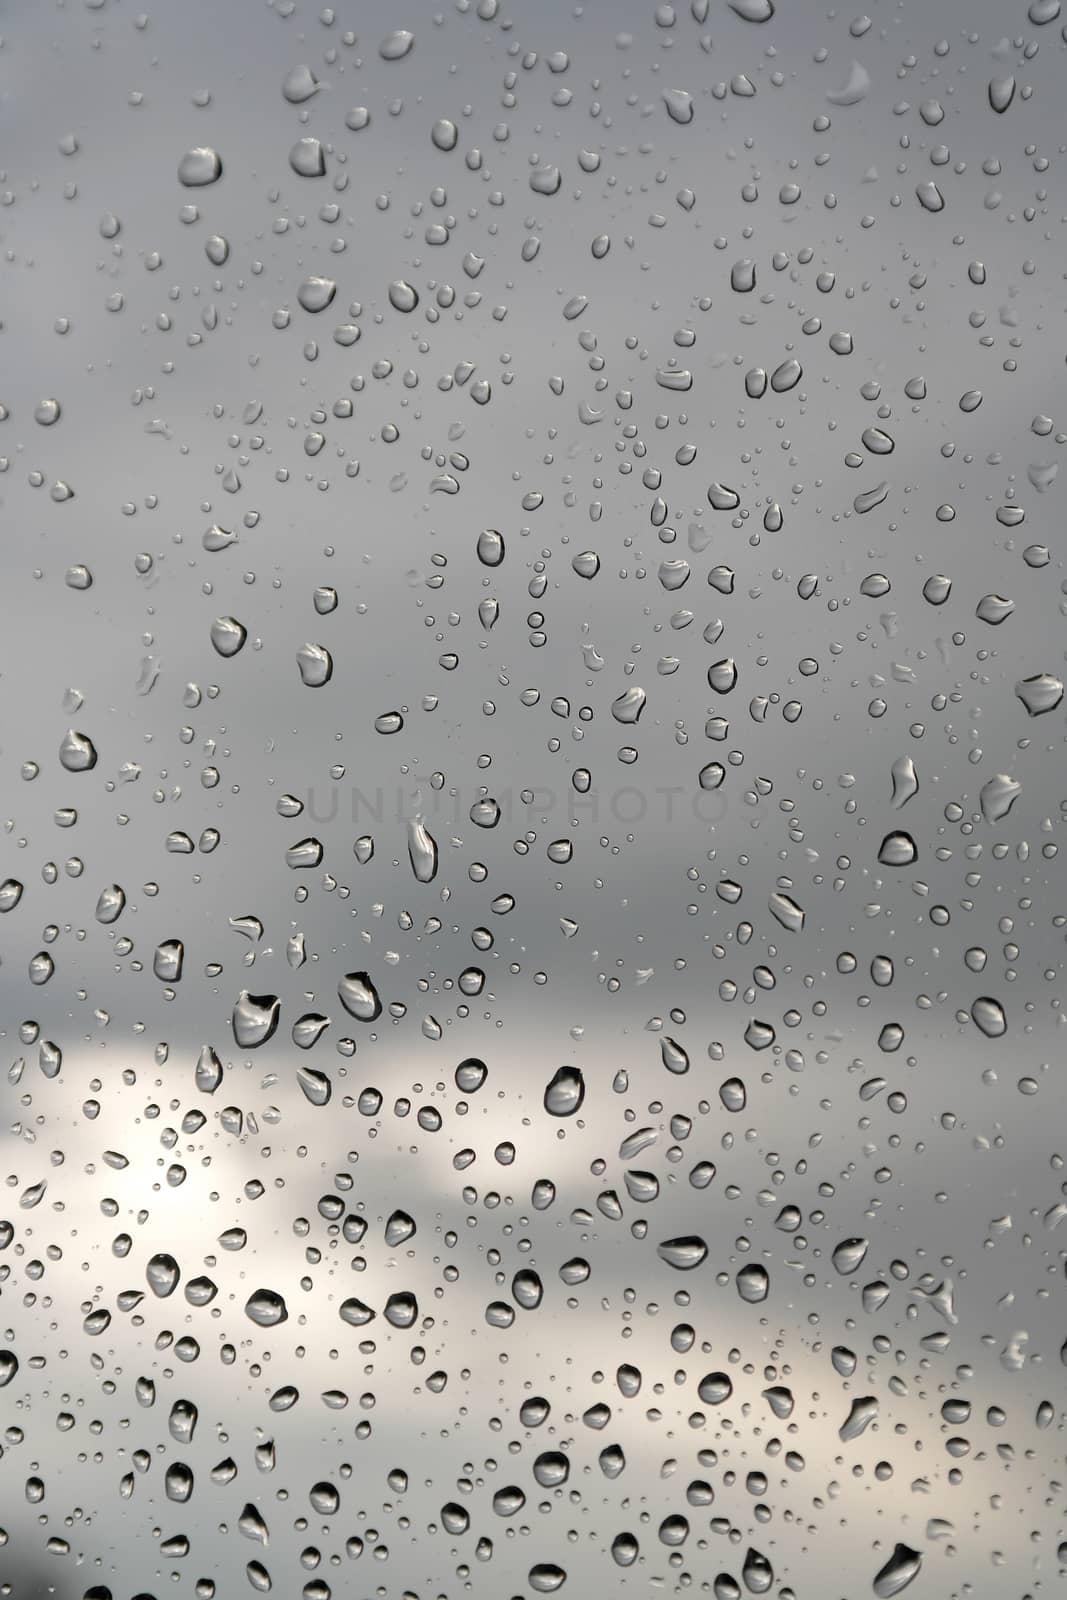 Abstract background, water drops on a window glass, rainy day